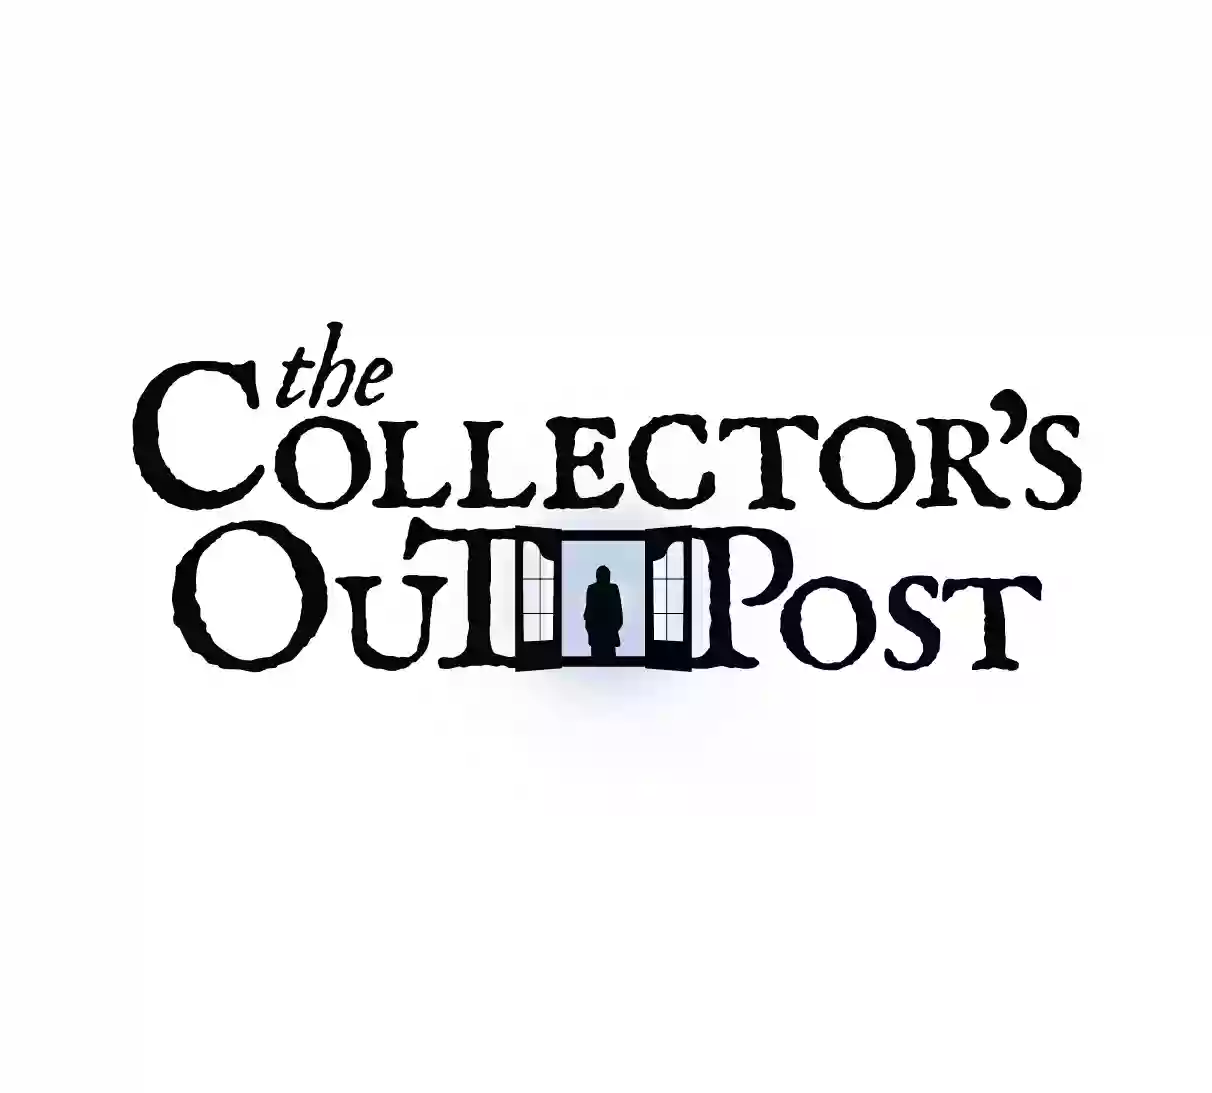 the Collector's Outpost